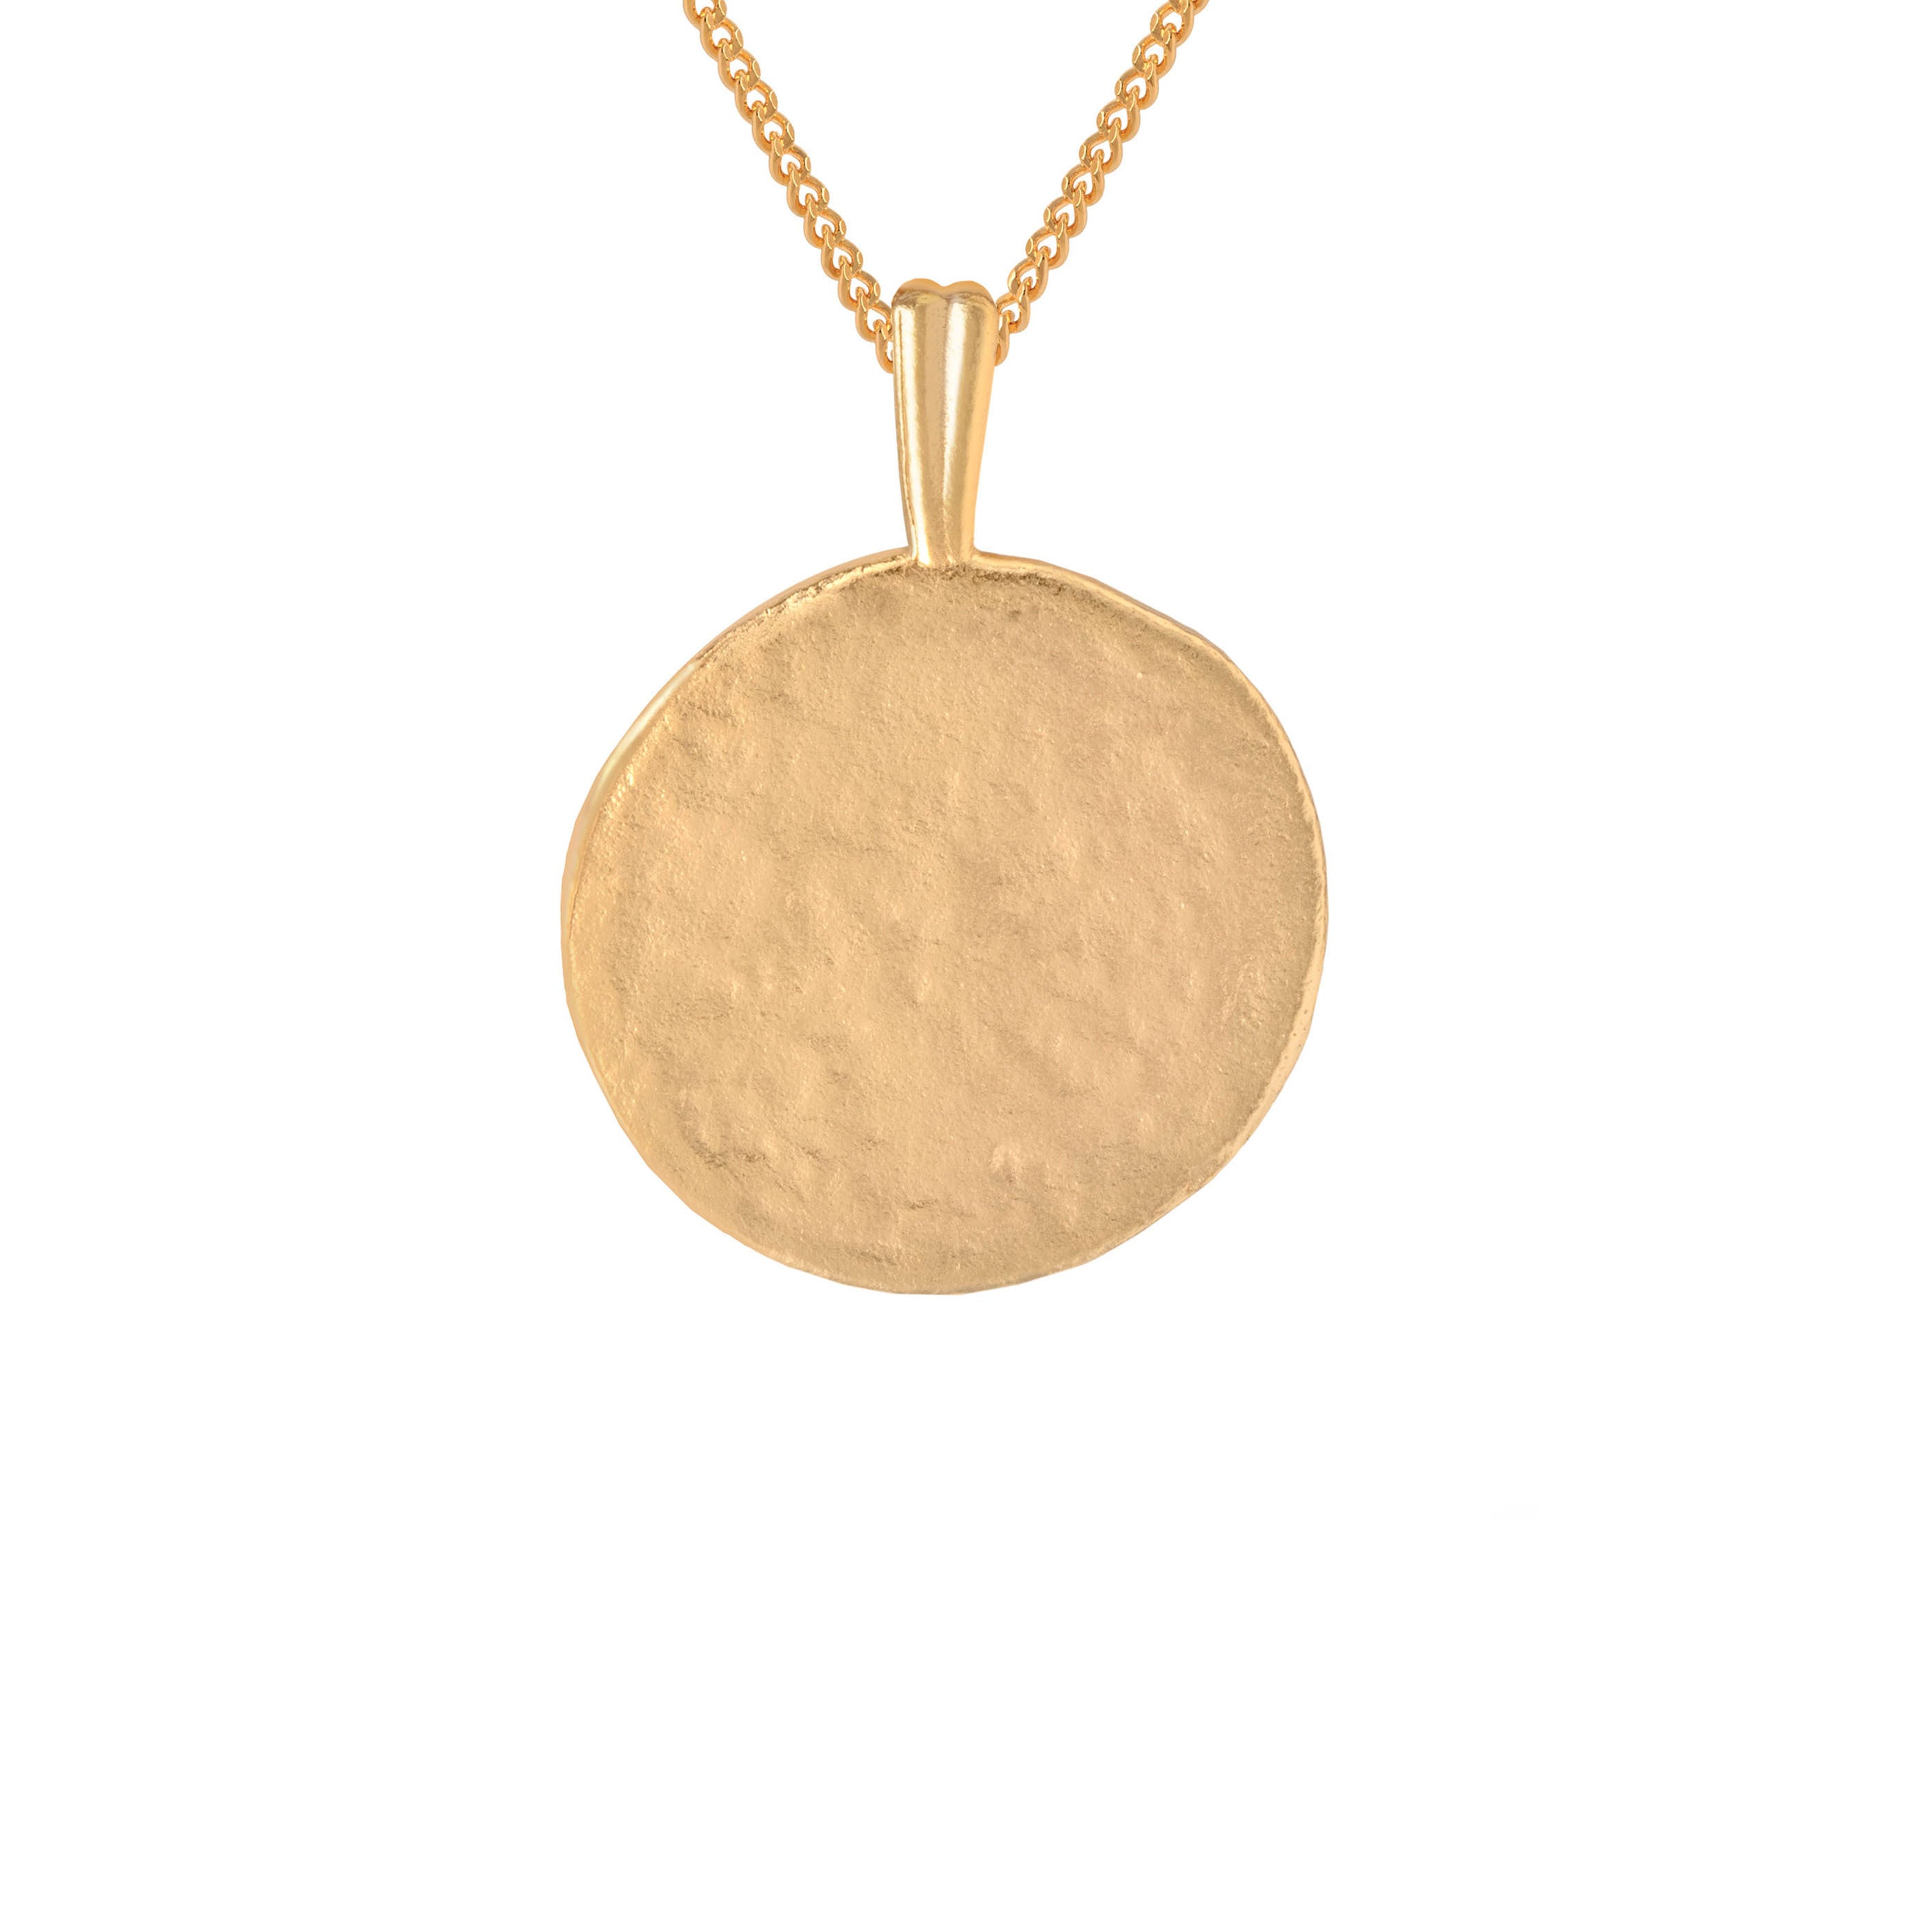 Cancer Zodiac Pendant Necklace in Gold back of pendant